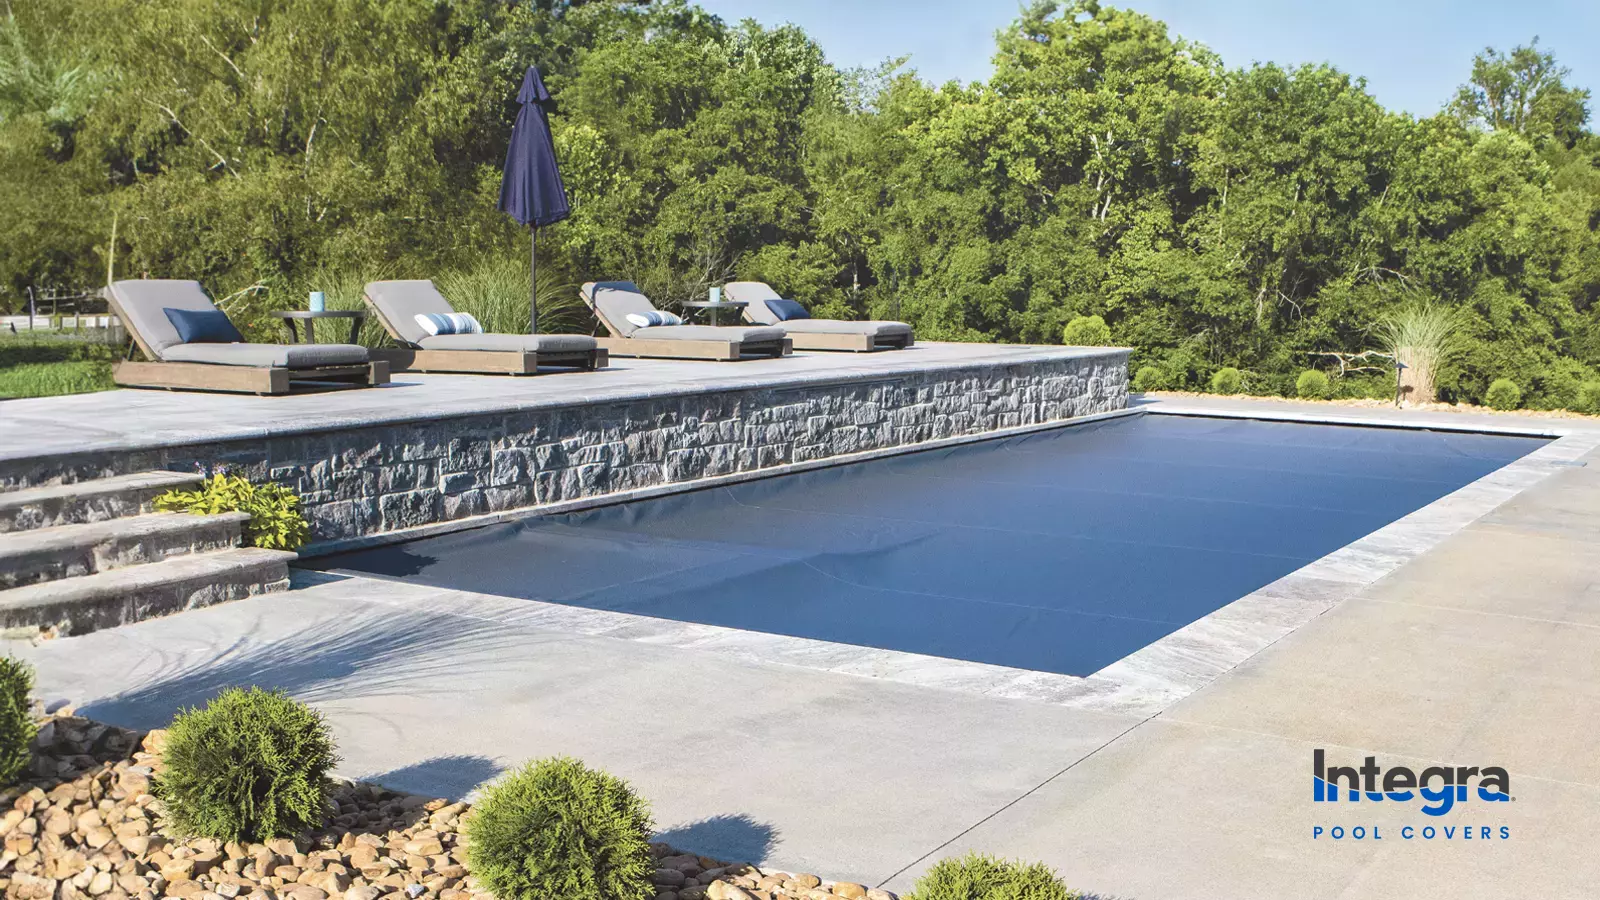 Integrated Pool Cover from Integra Pool Covers